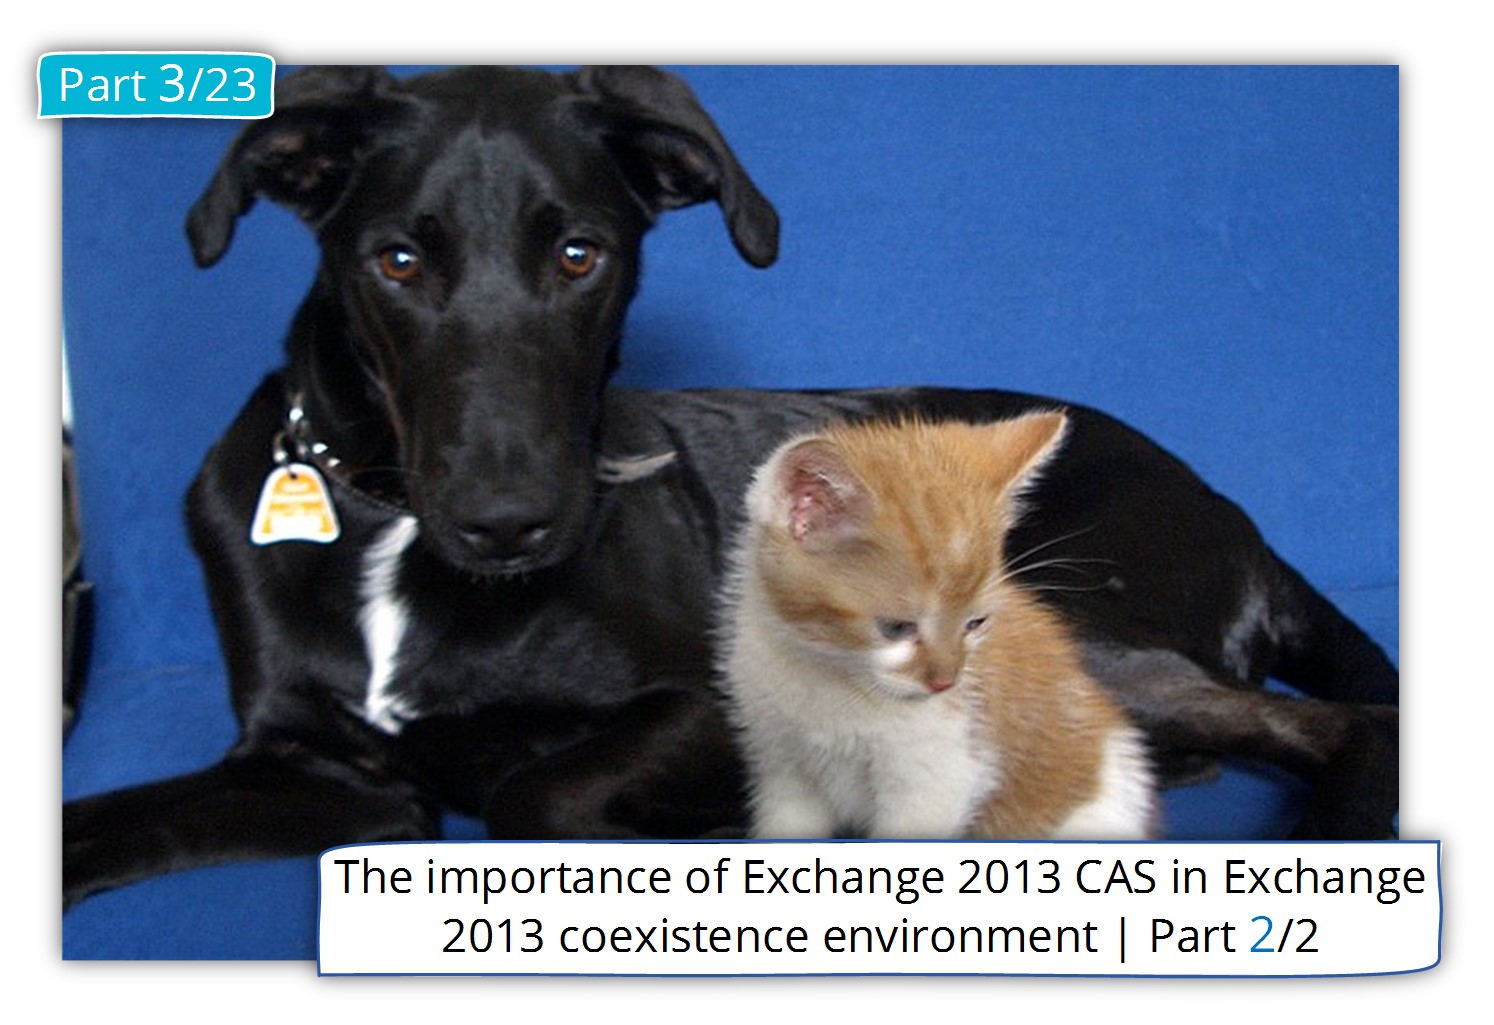 The importance of Exchange 2013 CAS in Exchange 2013 coexistence environment | Part 2/2